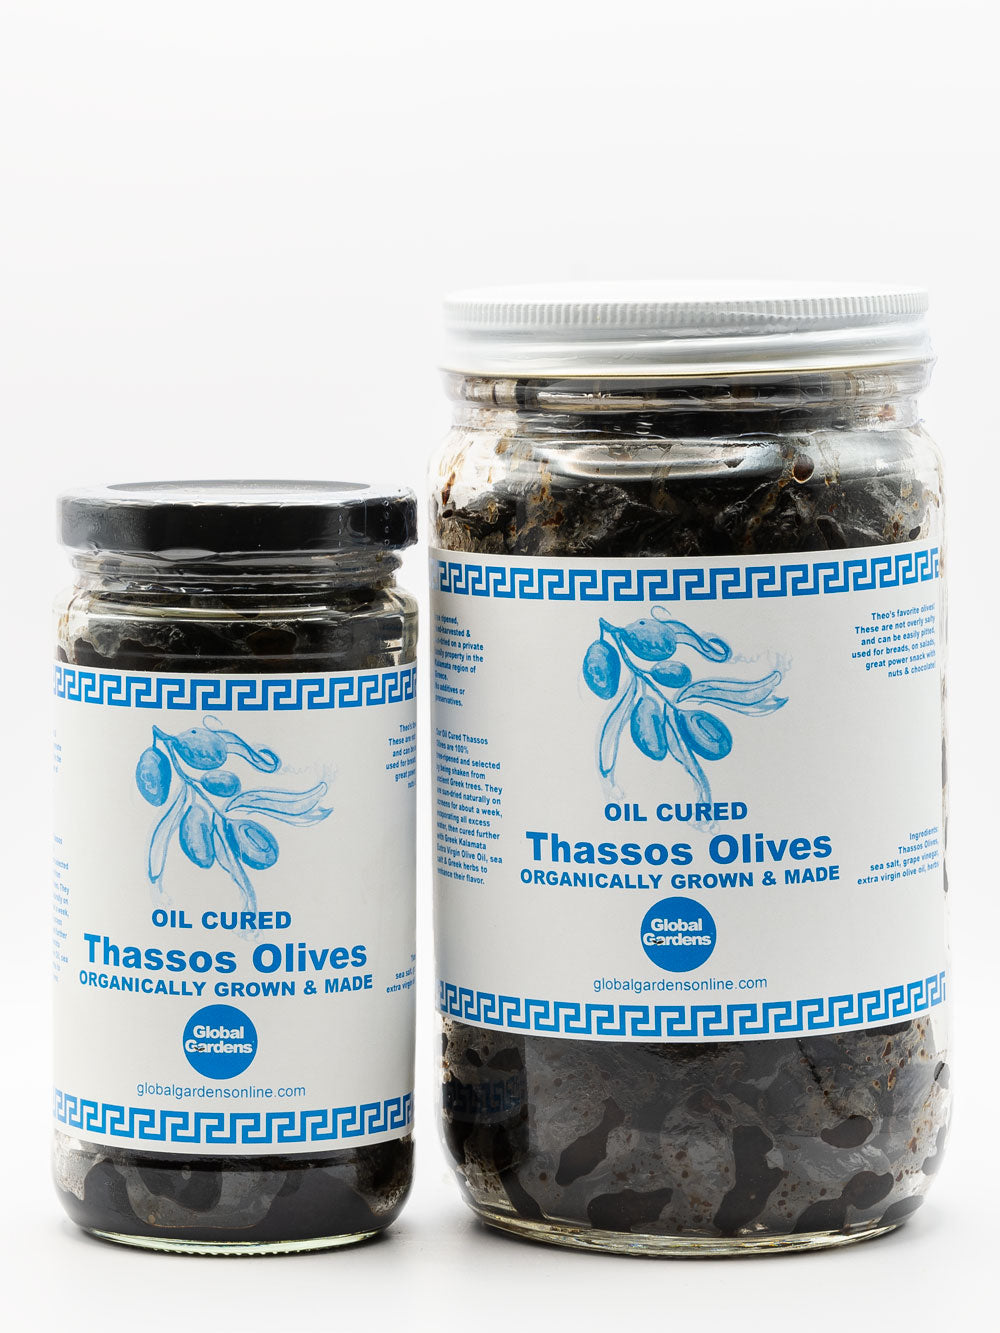 Thassos Oil-Cured Olives